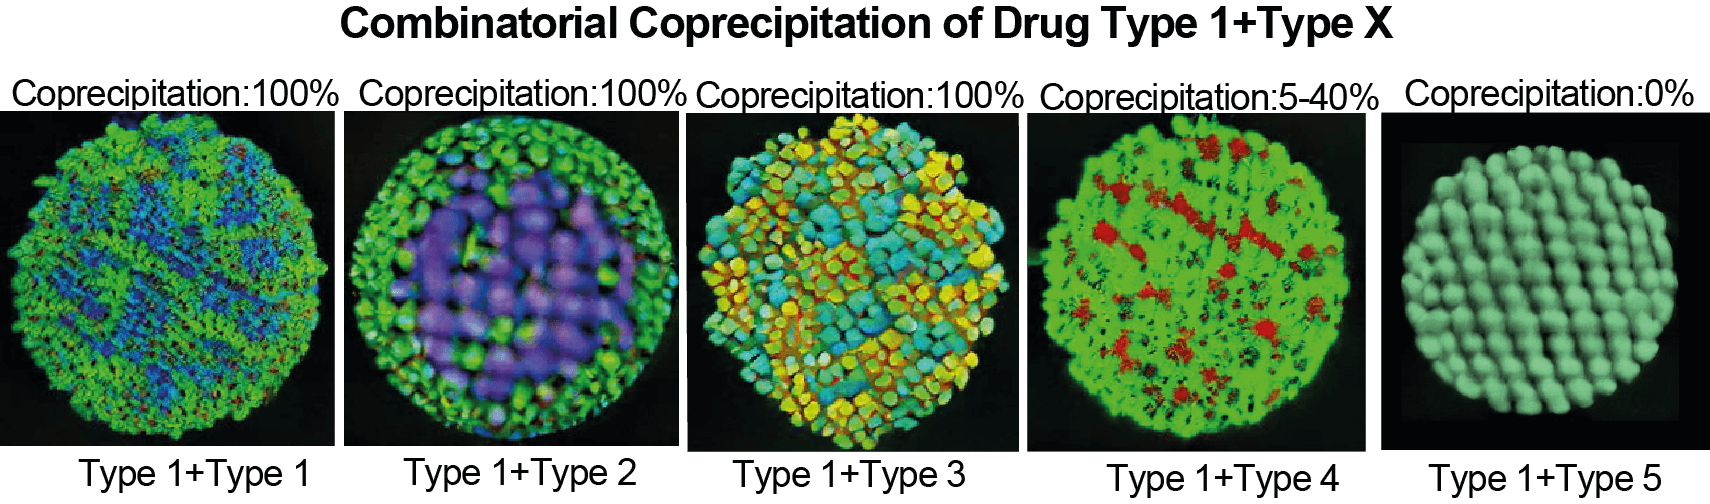 From 0 to 100%: the prediction provided by the model for metasynergy between different drugs